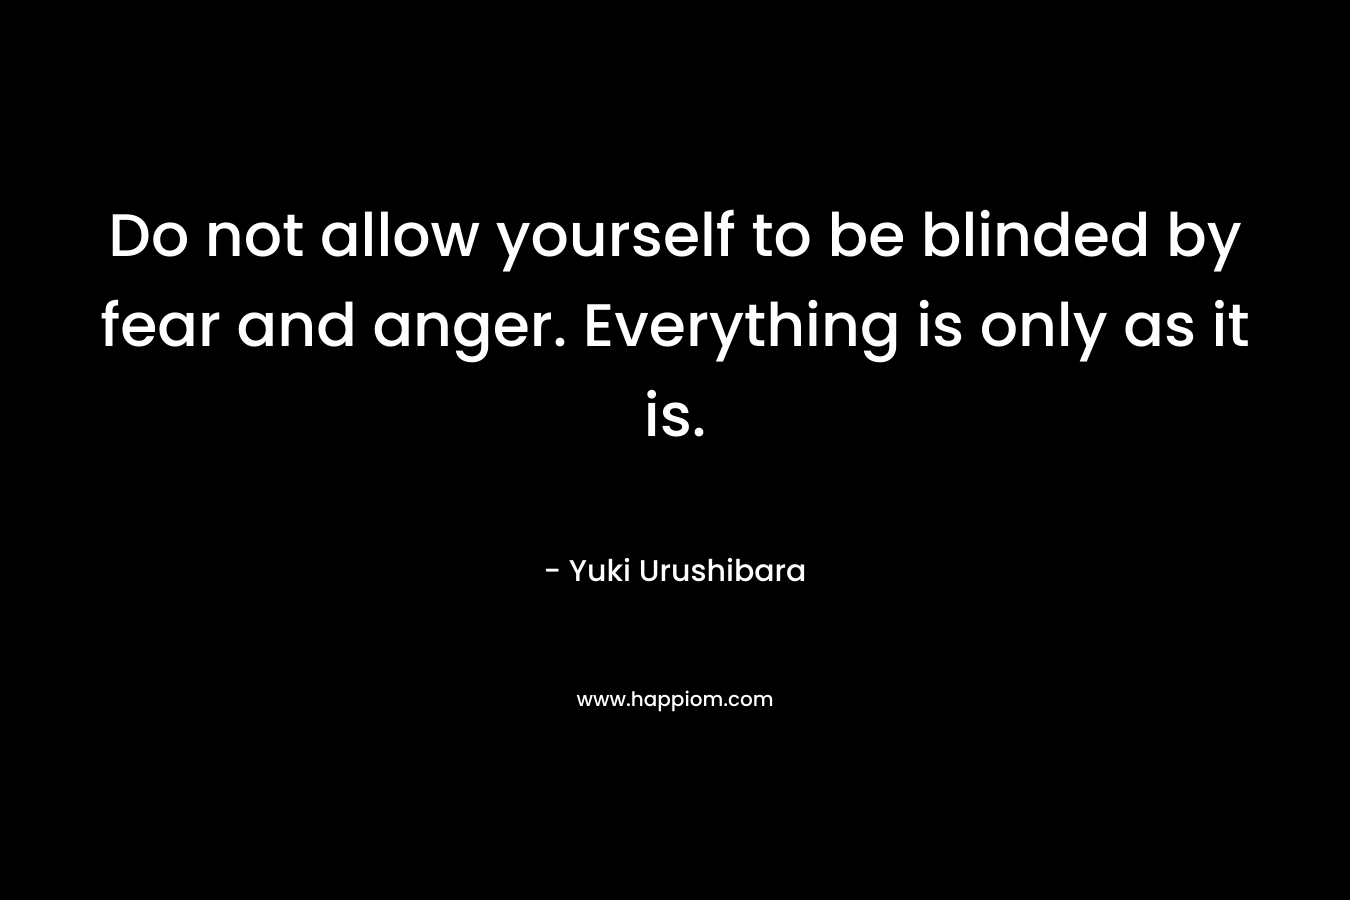 Do not allow yourself to be blinded by fear and anger. Everything is only as it is.